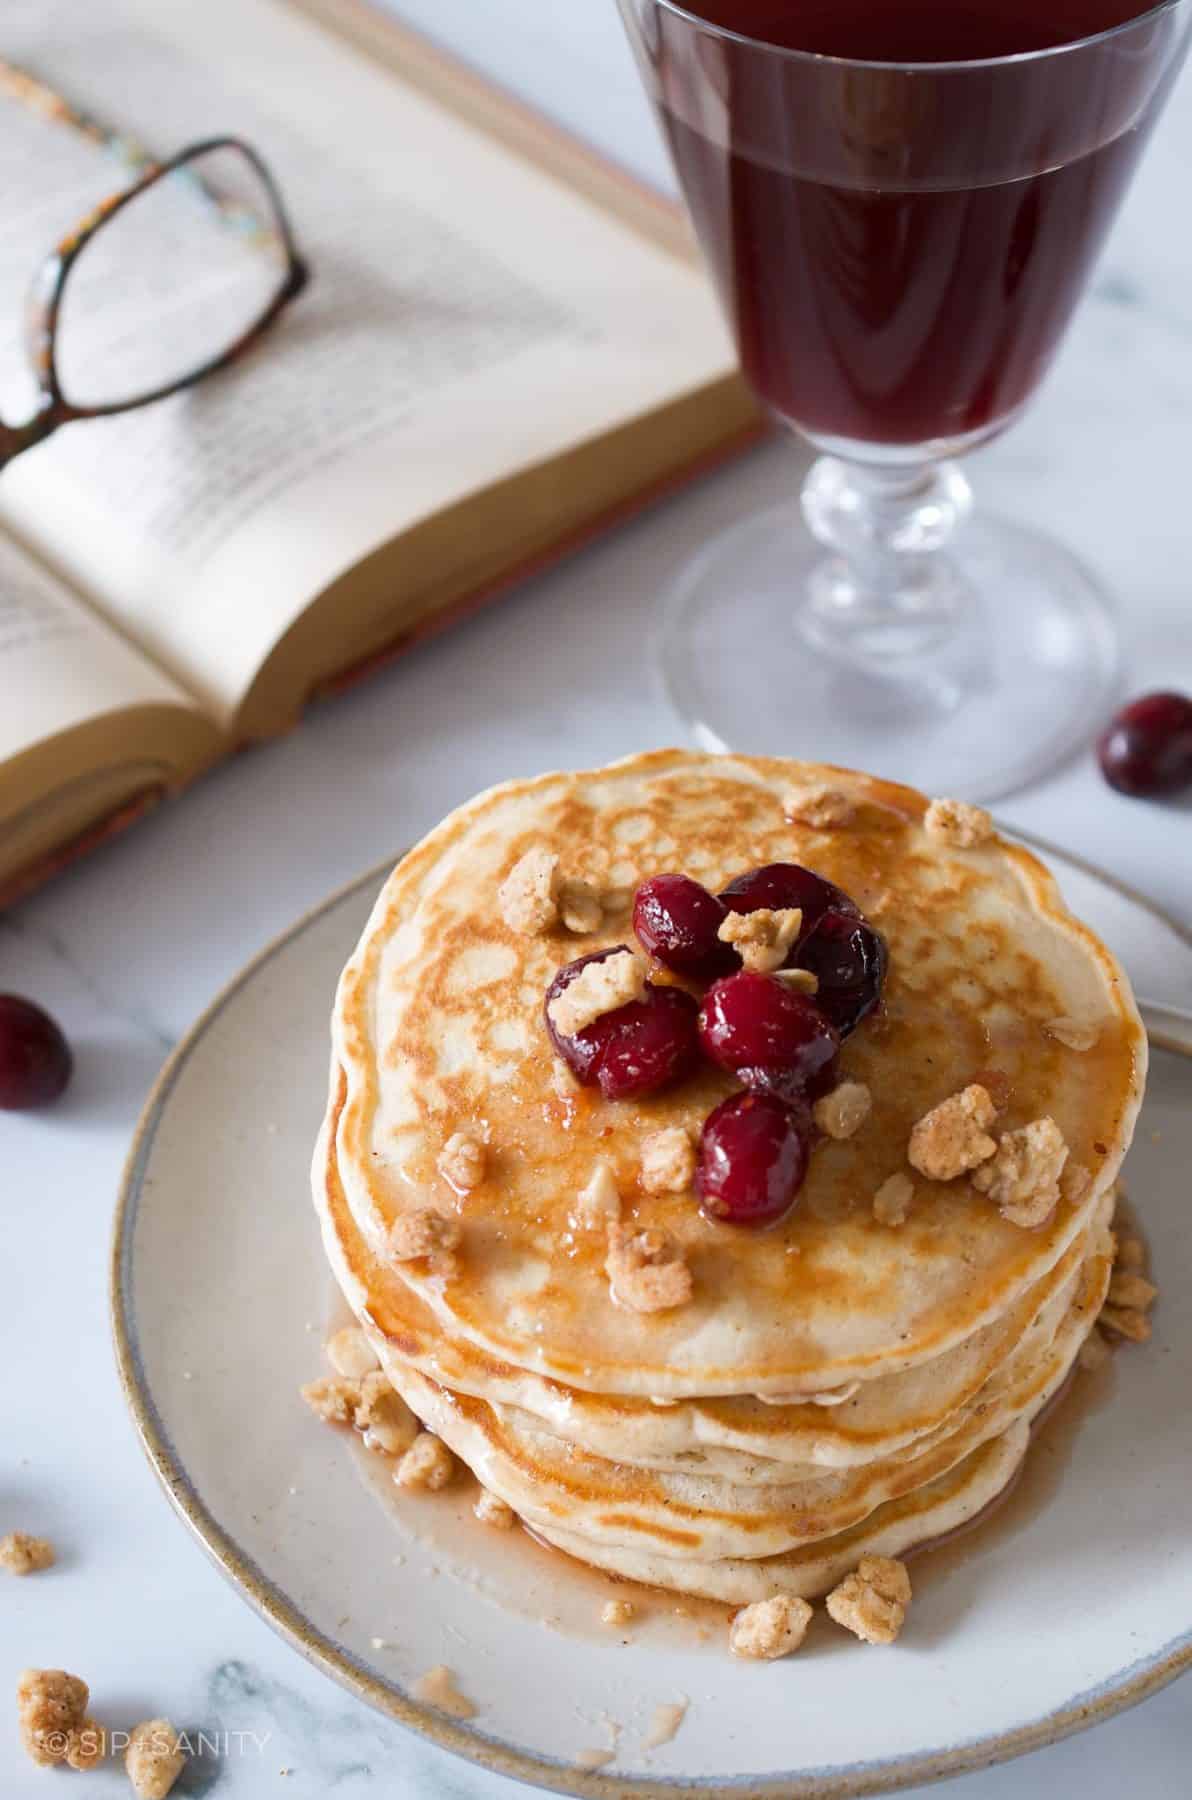 Stack of cranberry crumble pancakes next to a glass of juice and an open book.